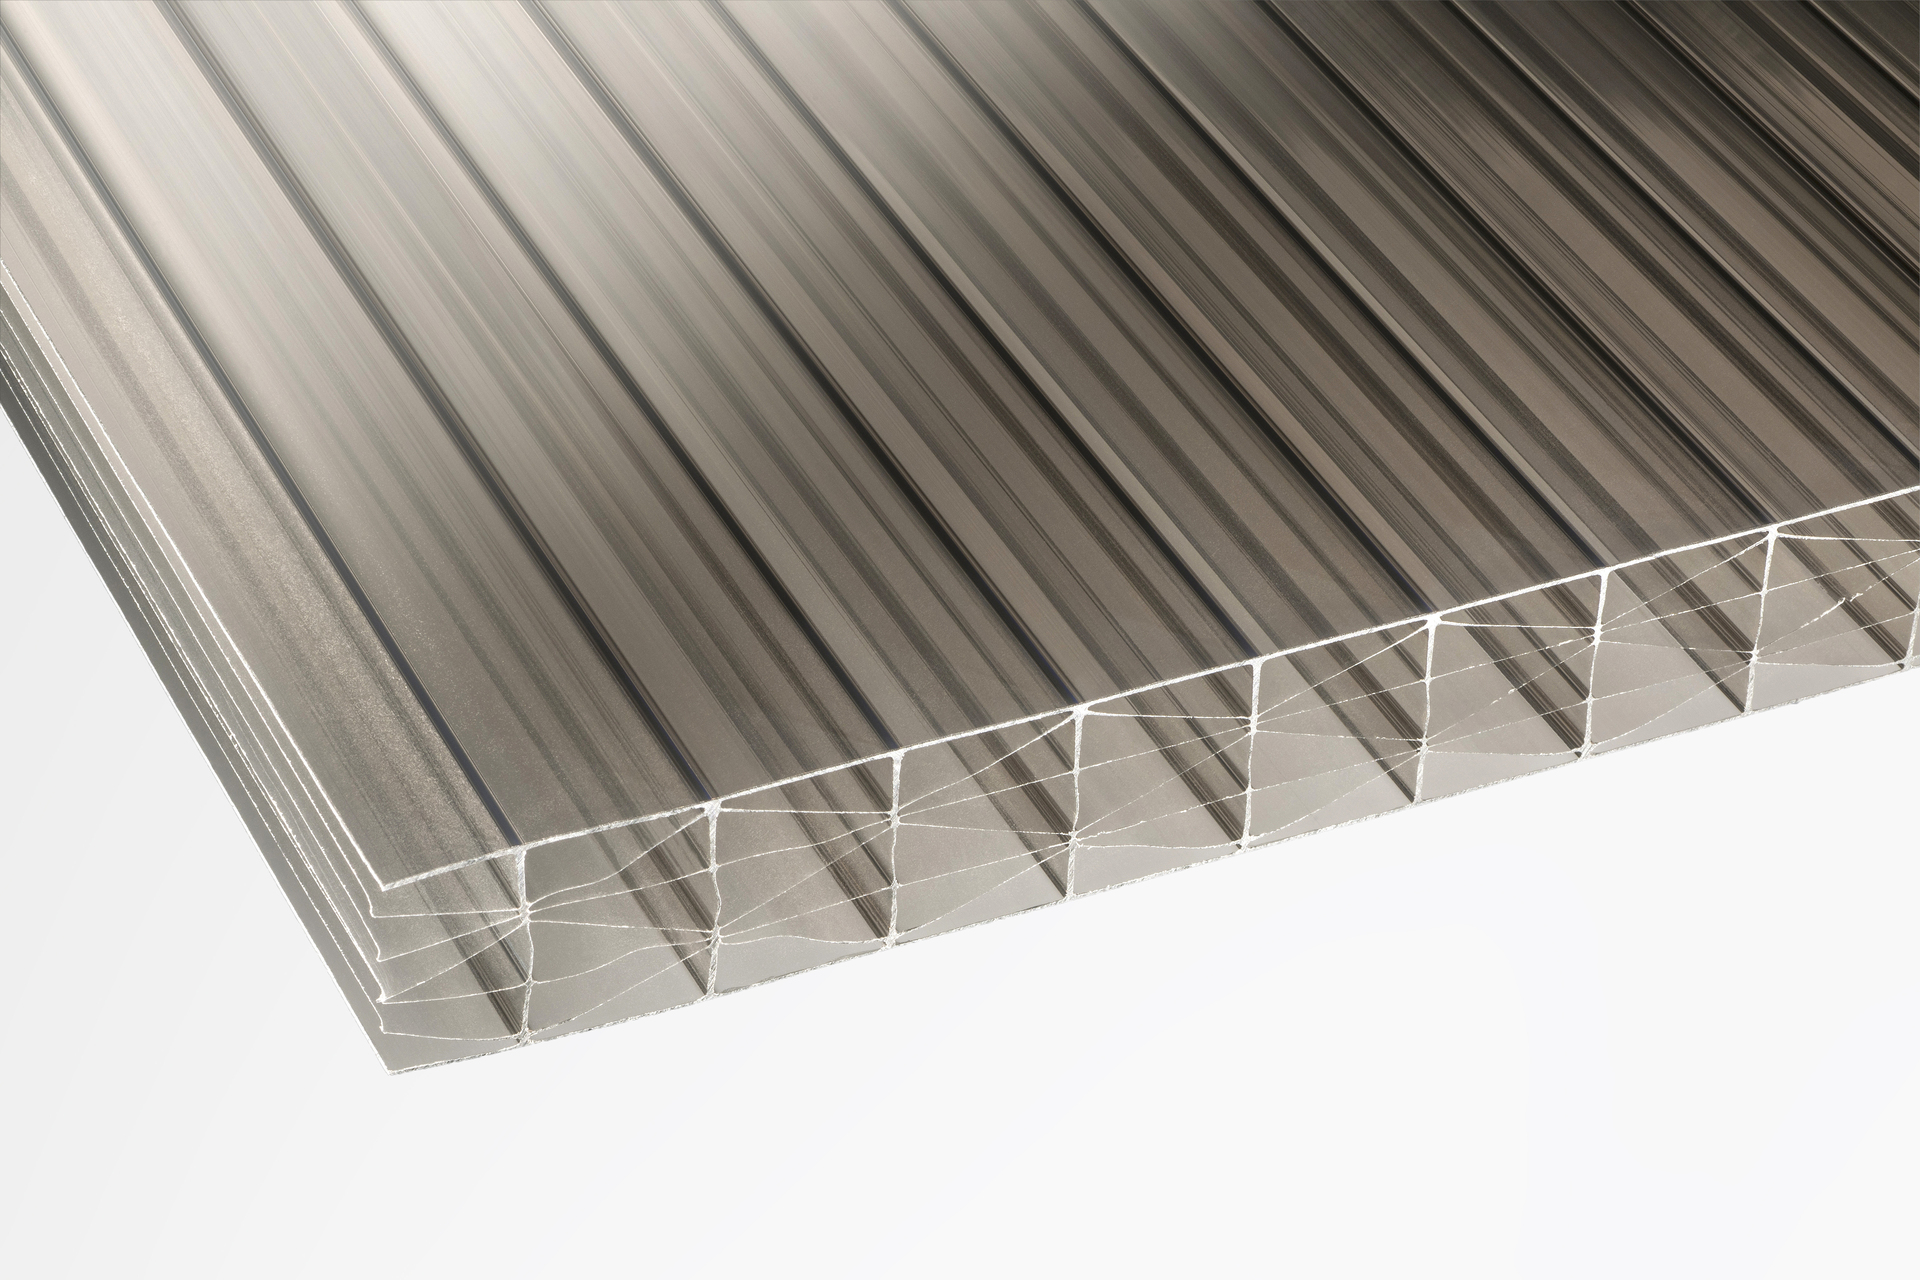 Image of 25mm Bronze Multiwall Polycarbonate Sheet - 2500 x 1600mm